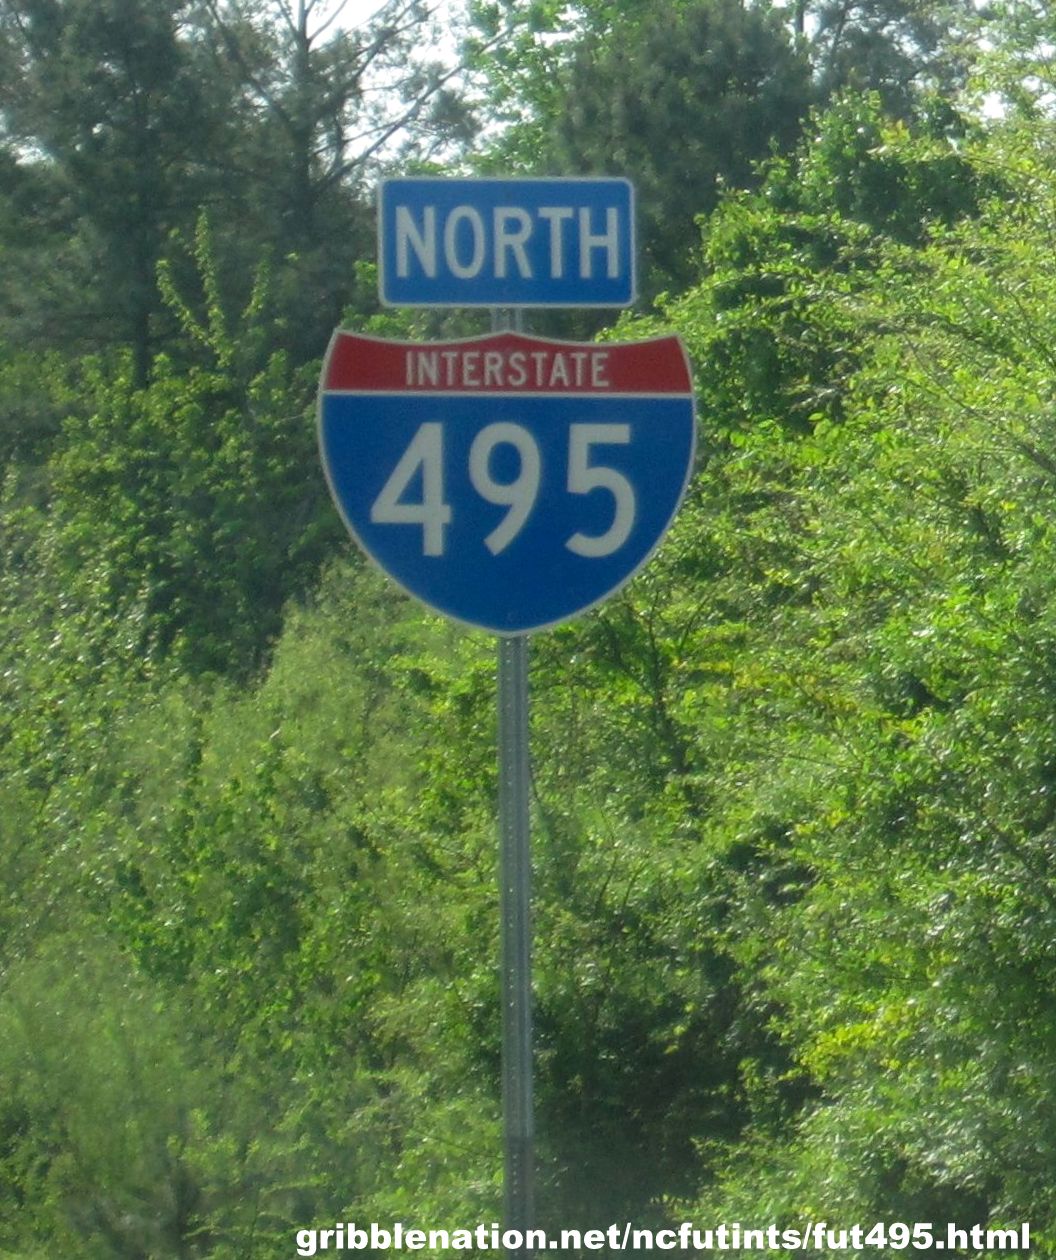 Image of newly installed North I-495 sign near Raleigh in 
April 2014